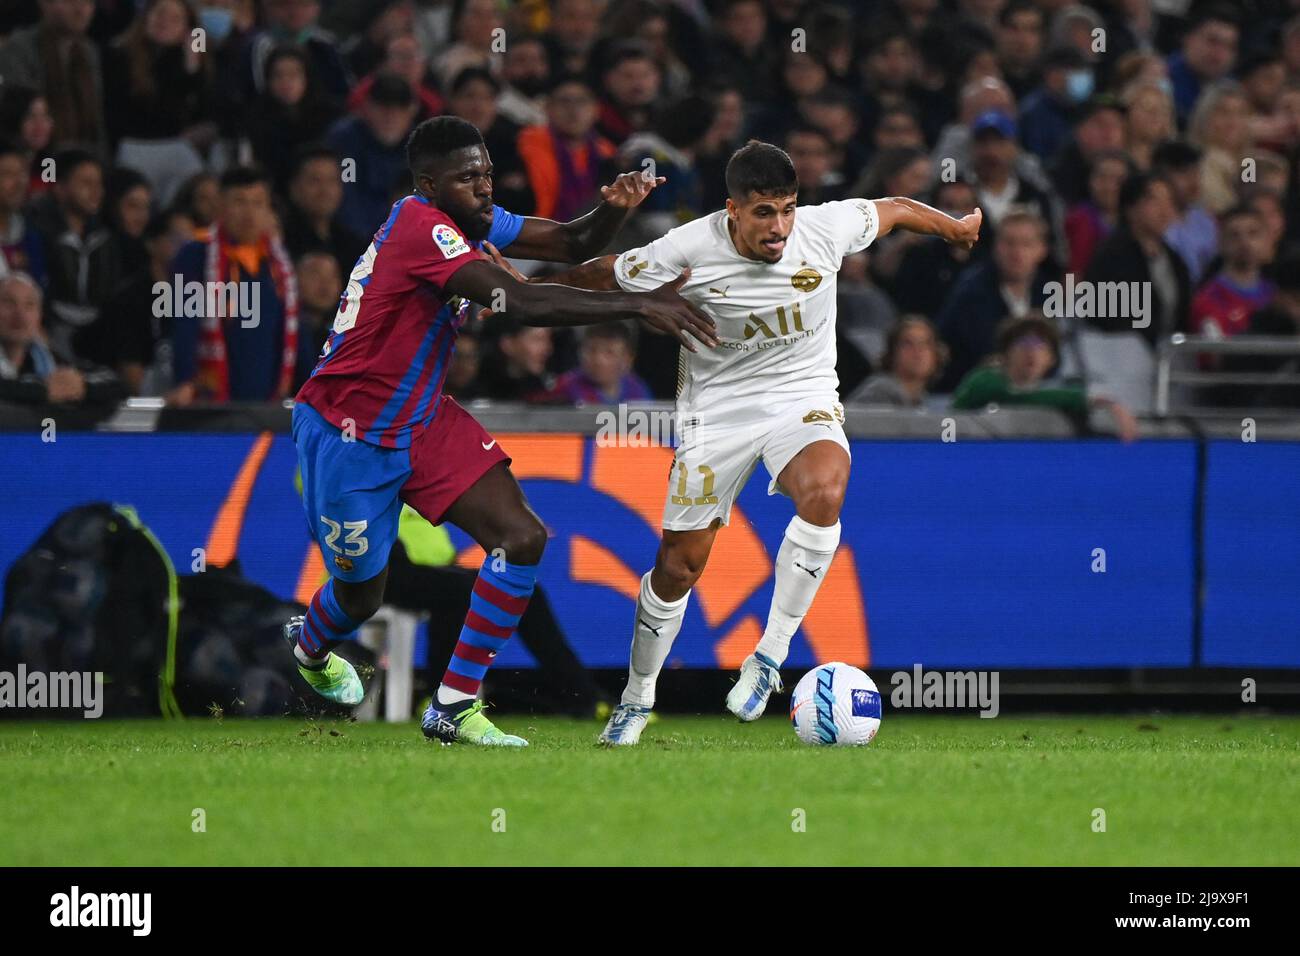 Sydney Olympic Park, Australia. 25th May, 2022. Samuel Yves Umtiti (L) of FC Barcelona team and Daniel dos Santos Penha (R) of A-Leagues All Stars team in action during the match between FC Barcelona and the A-League All Stars at Accor Stadium. (Final score; FC Barcelona 3:2 A-Leagues All Stars). (Photo by Luis Veniegra/SOPA Images/Sipa USA) Credit: Sipa USA/Alamy Live News Stock Photo